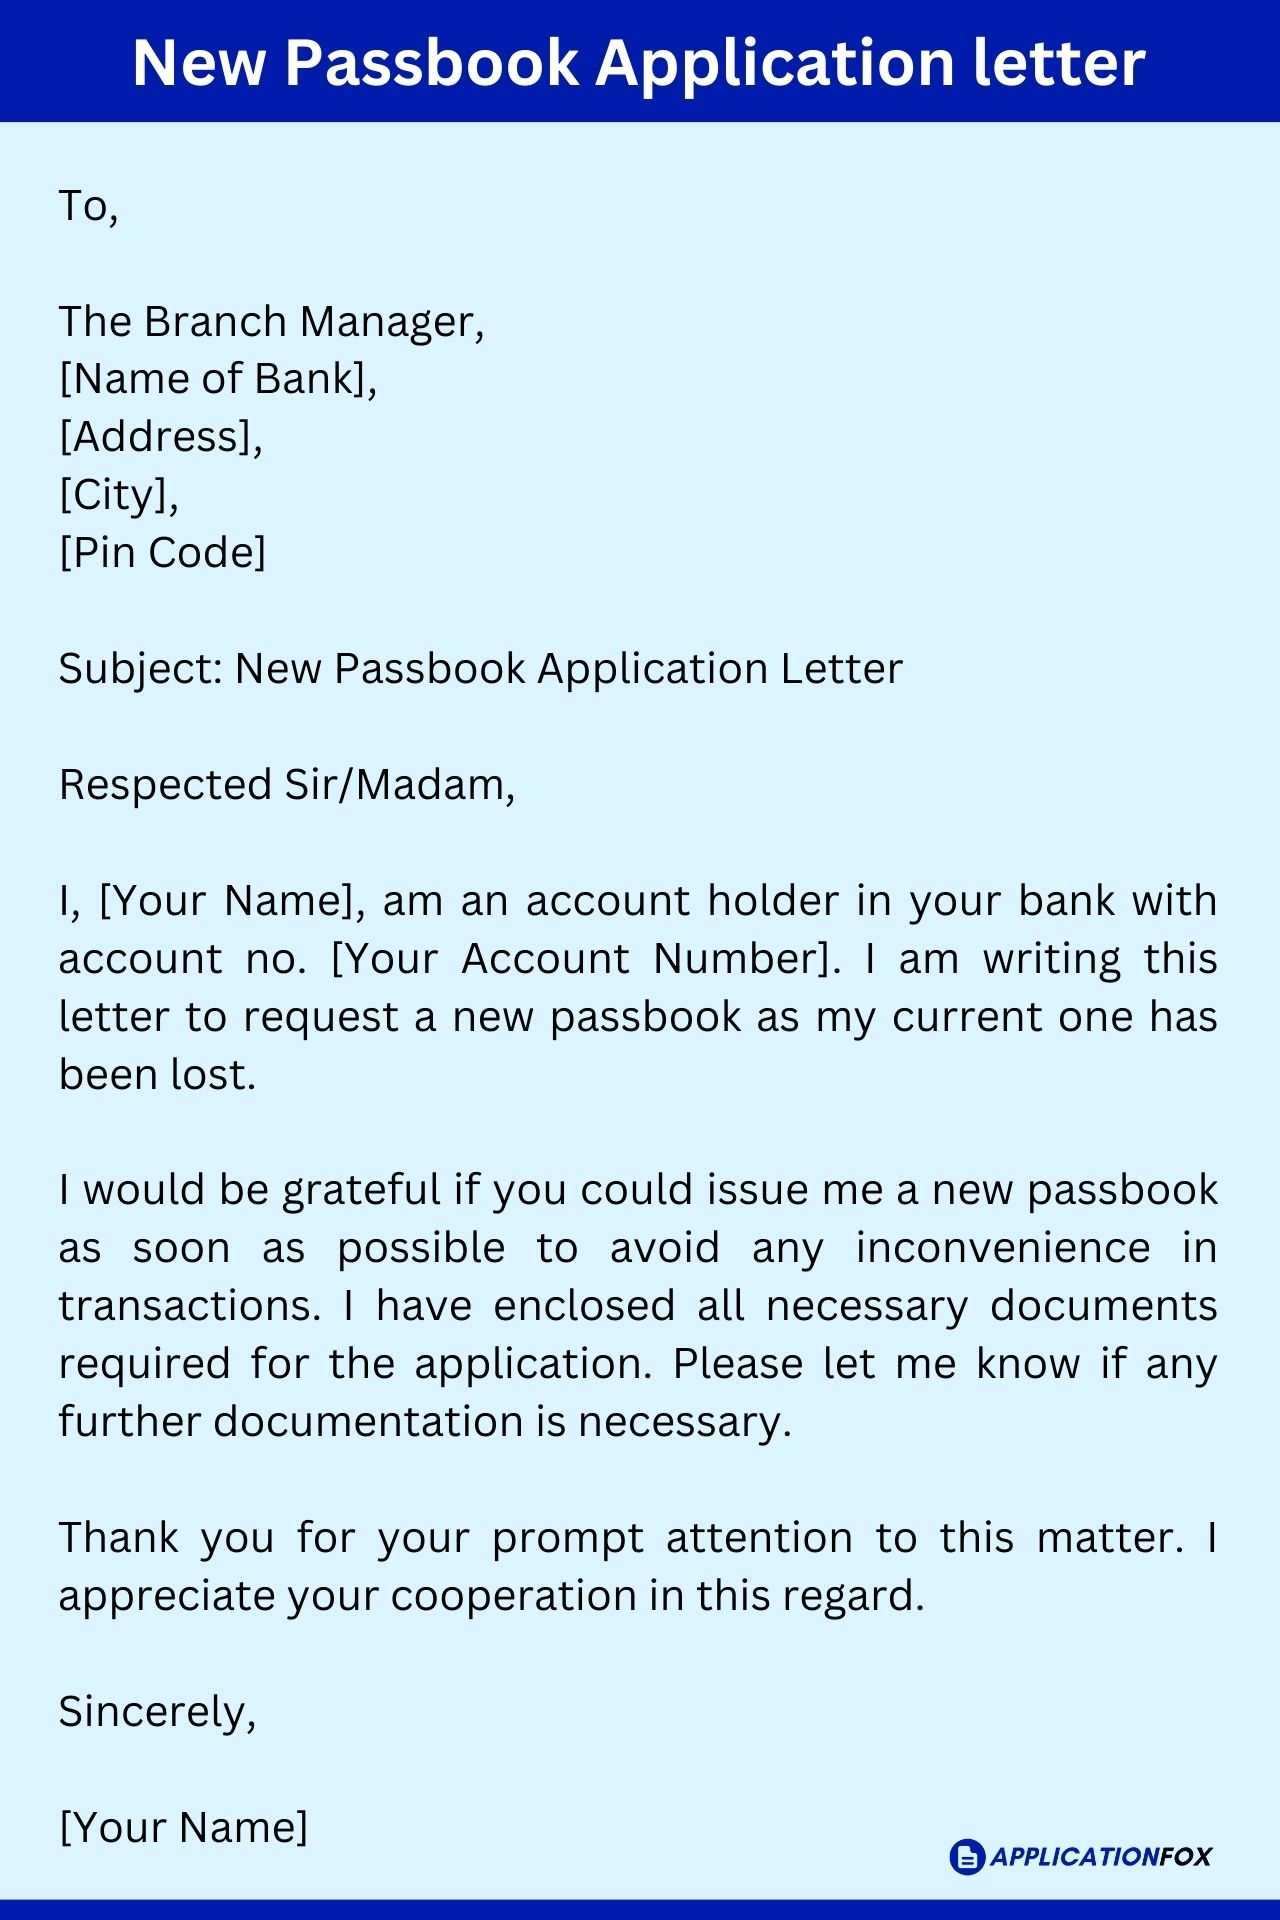 application letter for new passbook in bank